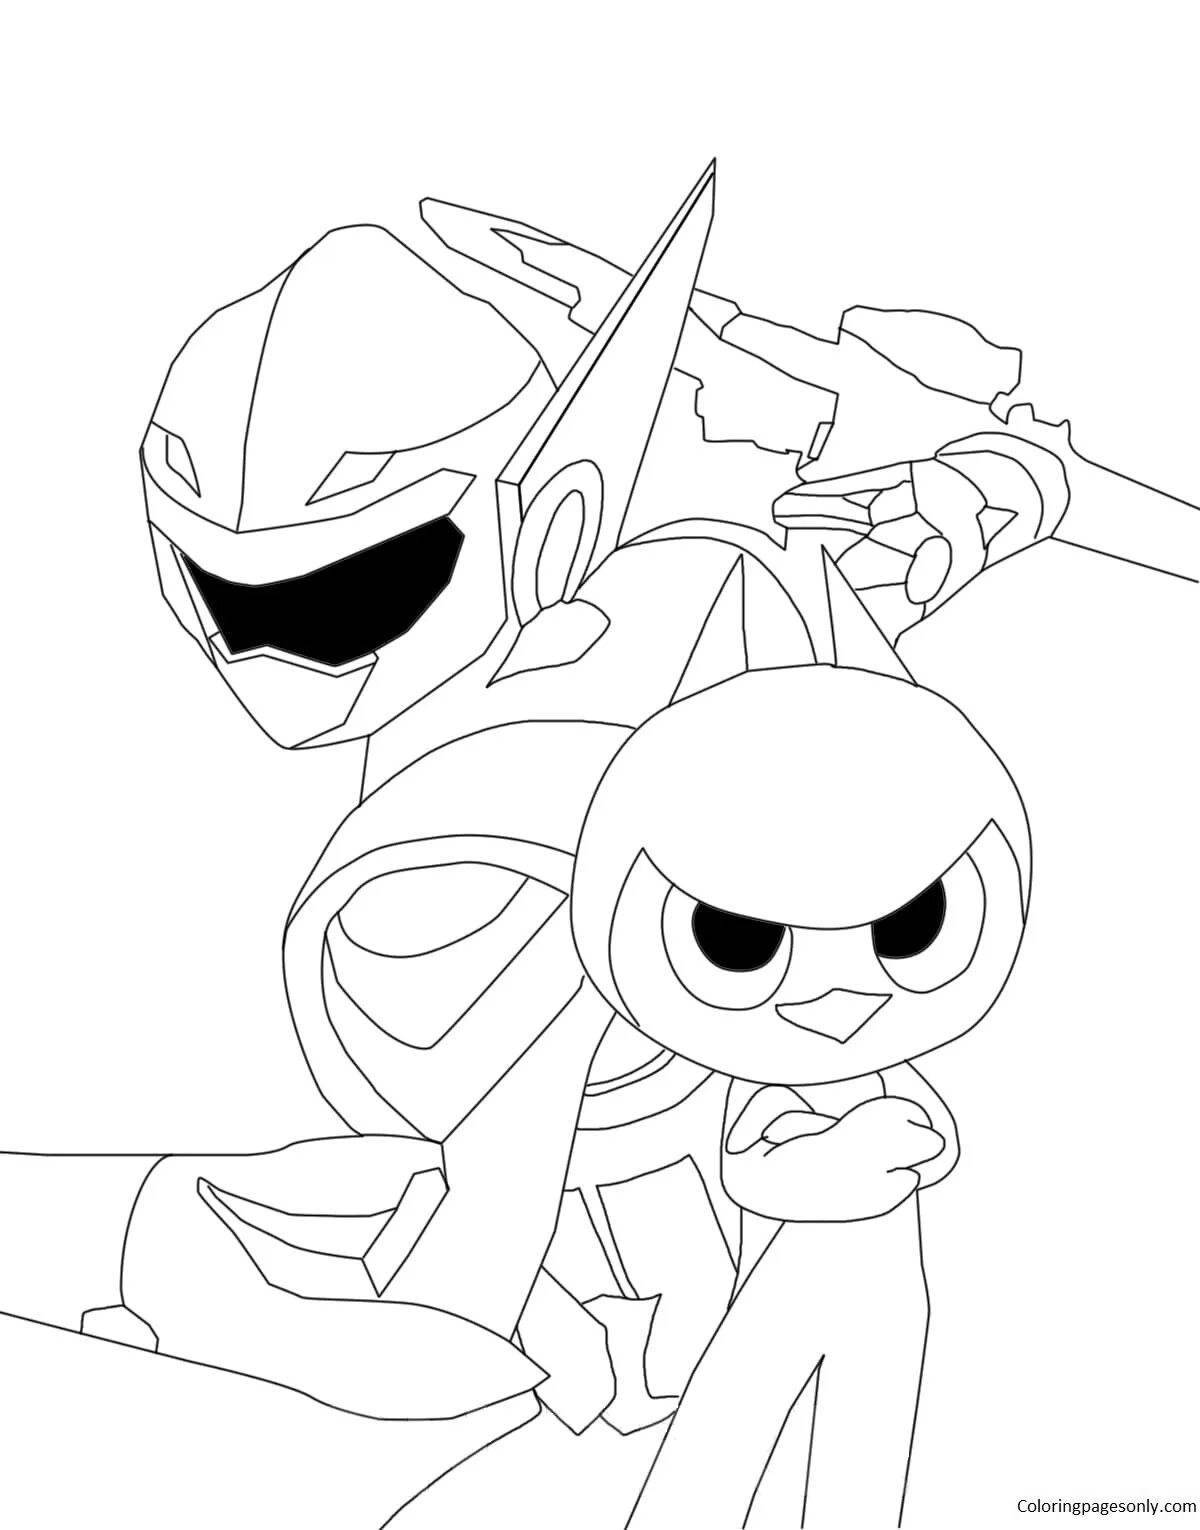 Adorable mini force coloring page